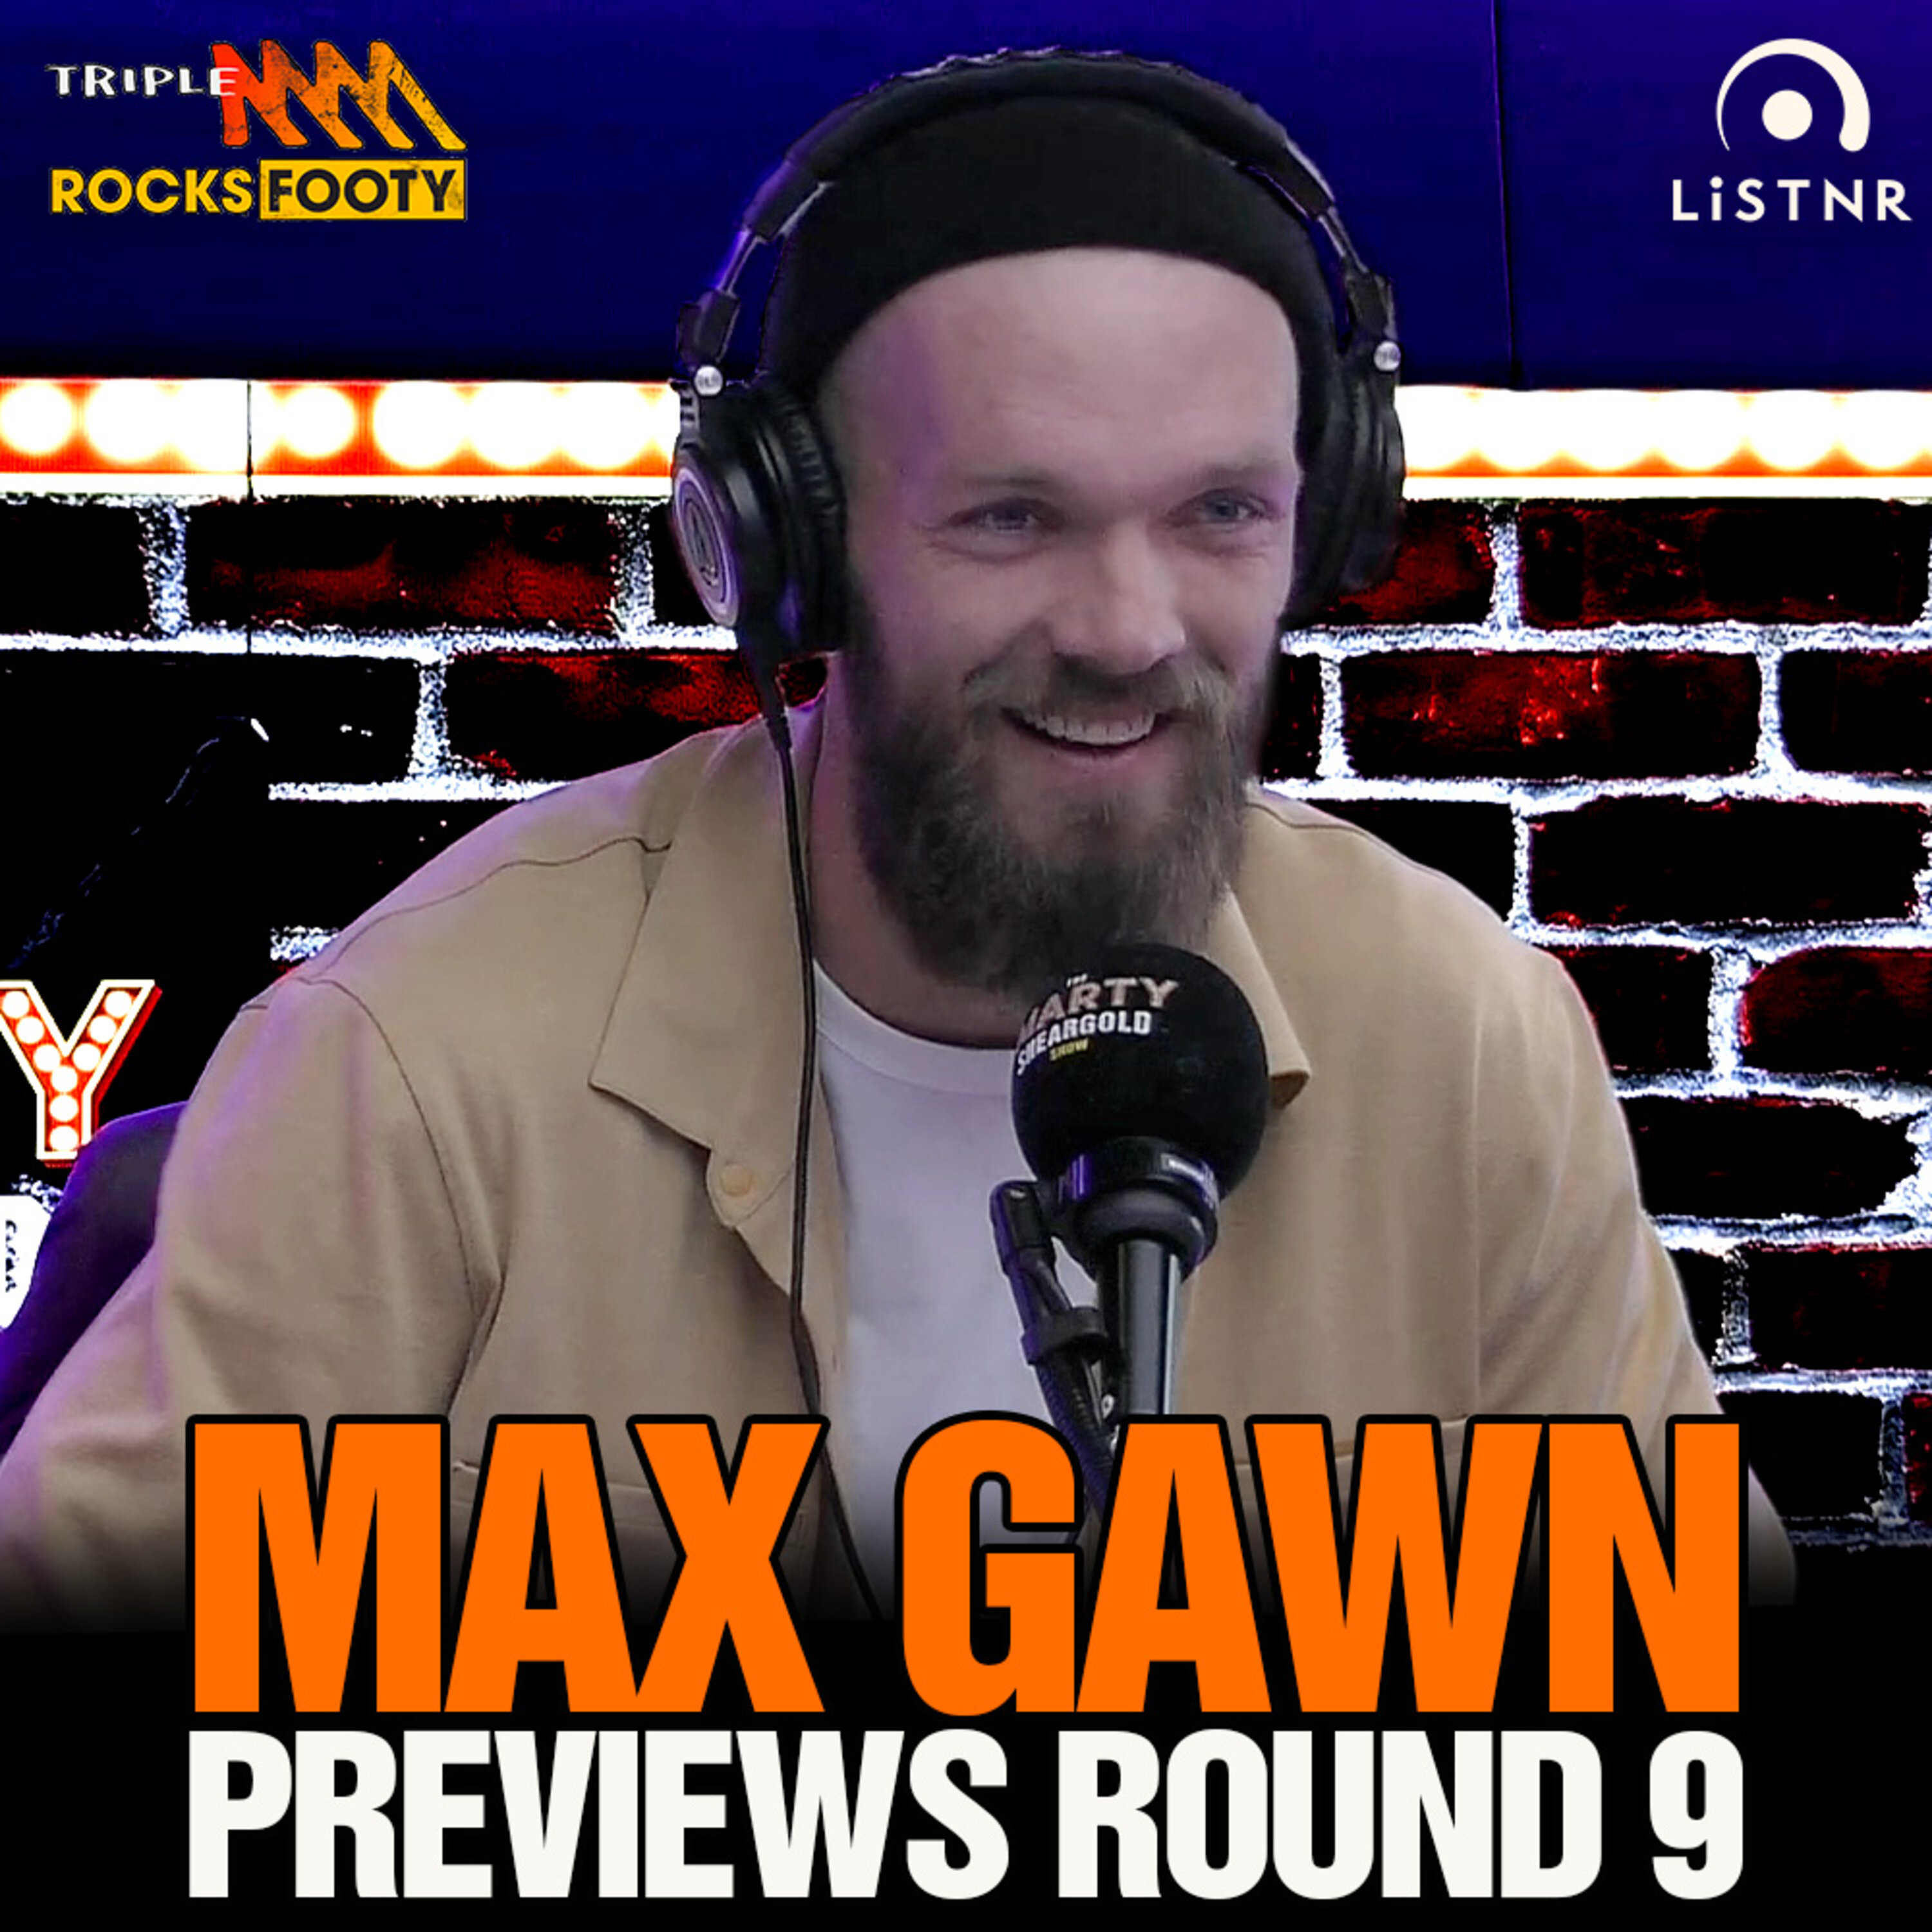 Max Gawn on Jacob van Rooyen's ban being overturned, Neale Daniher, and a preview of round 9